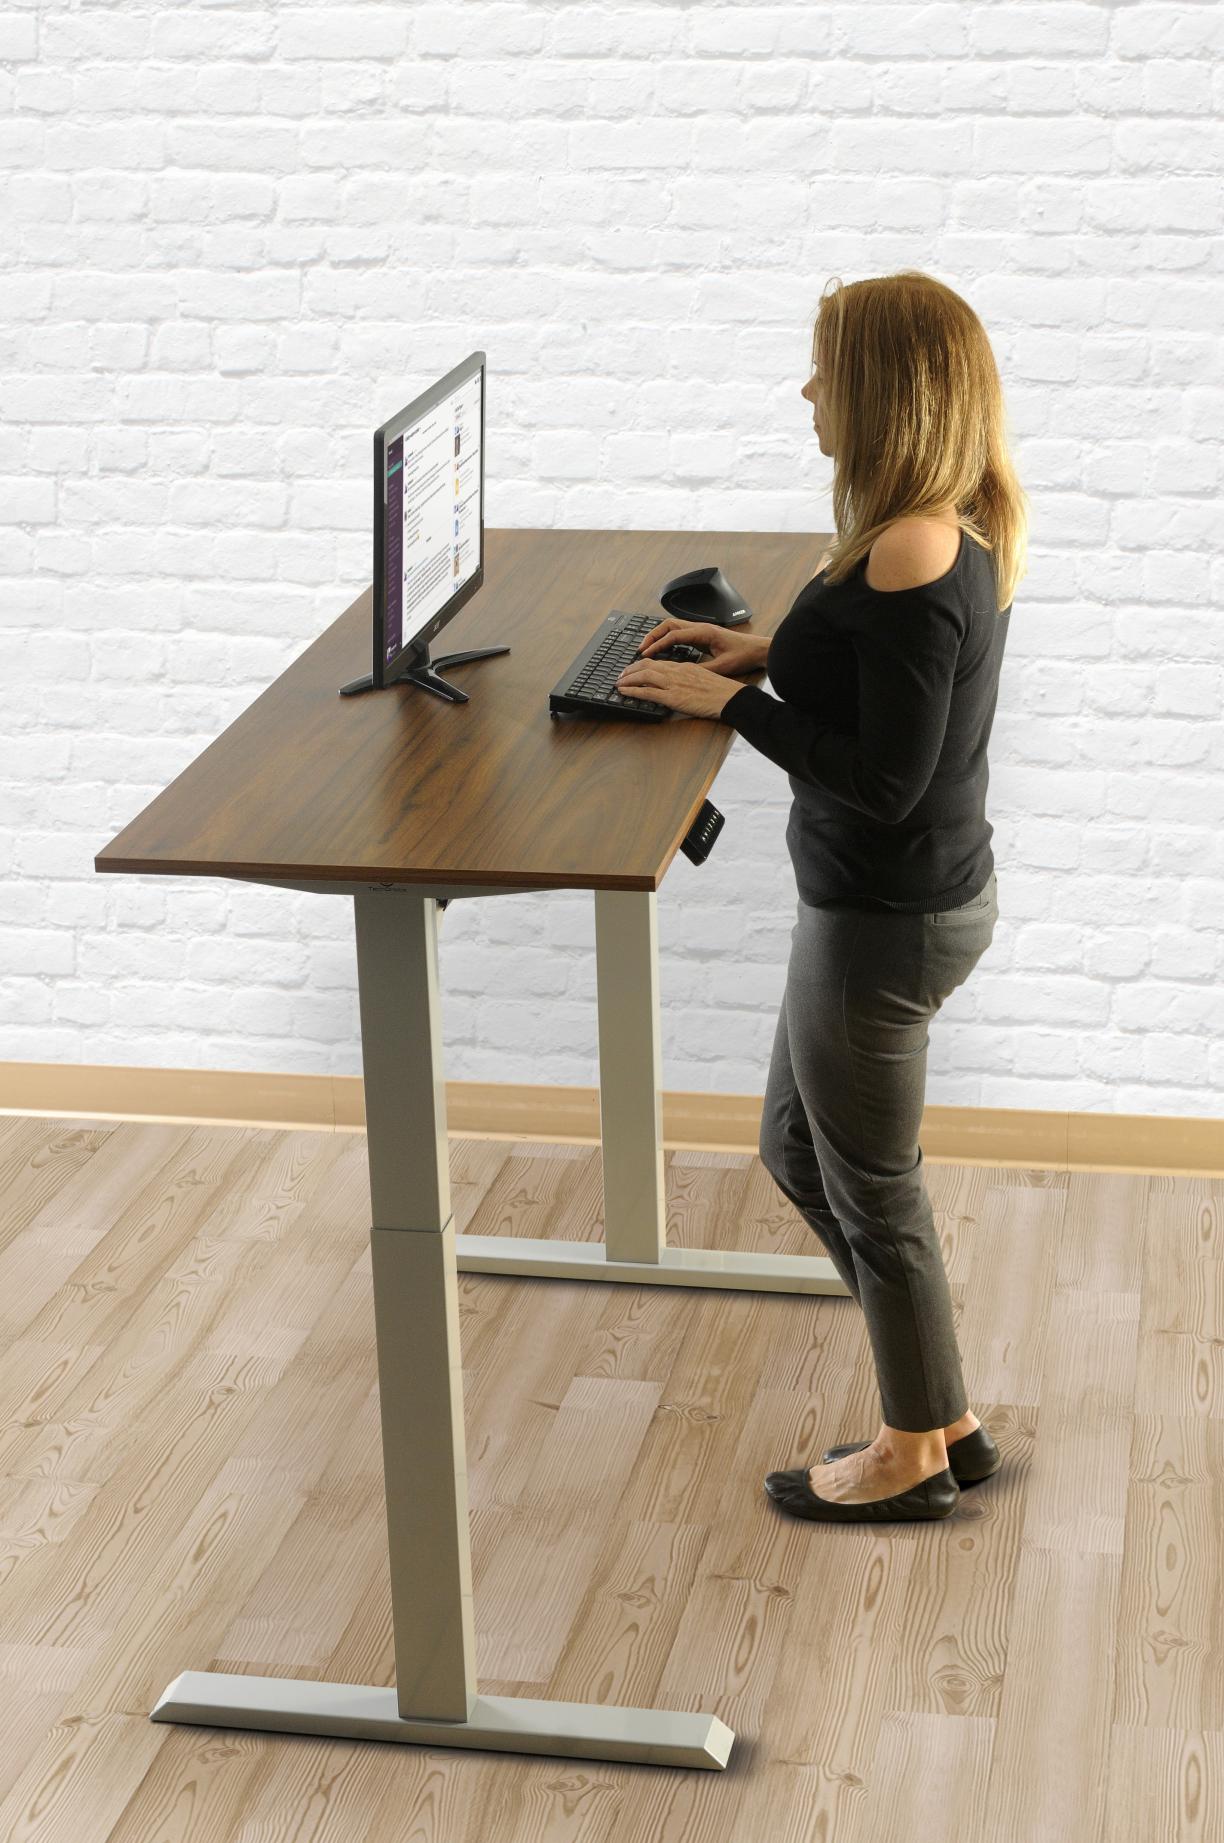 How Can Standing Desks Help Me Stay Focused and Productive?